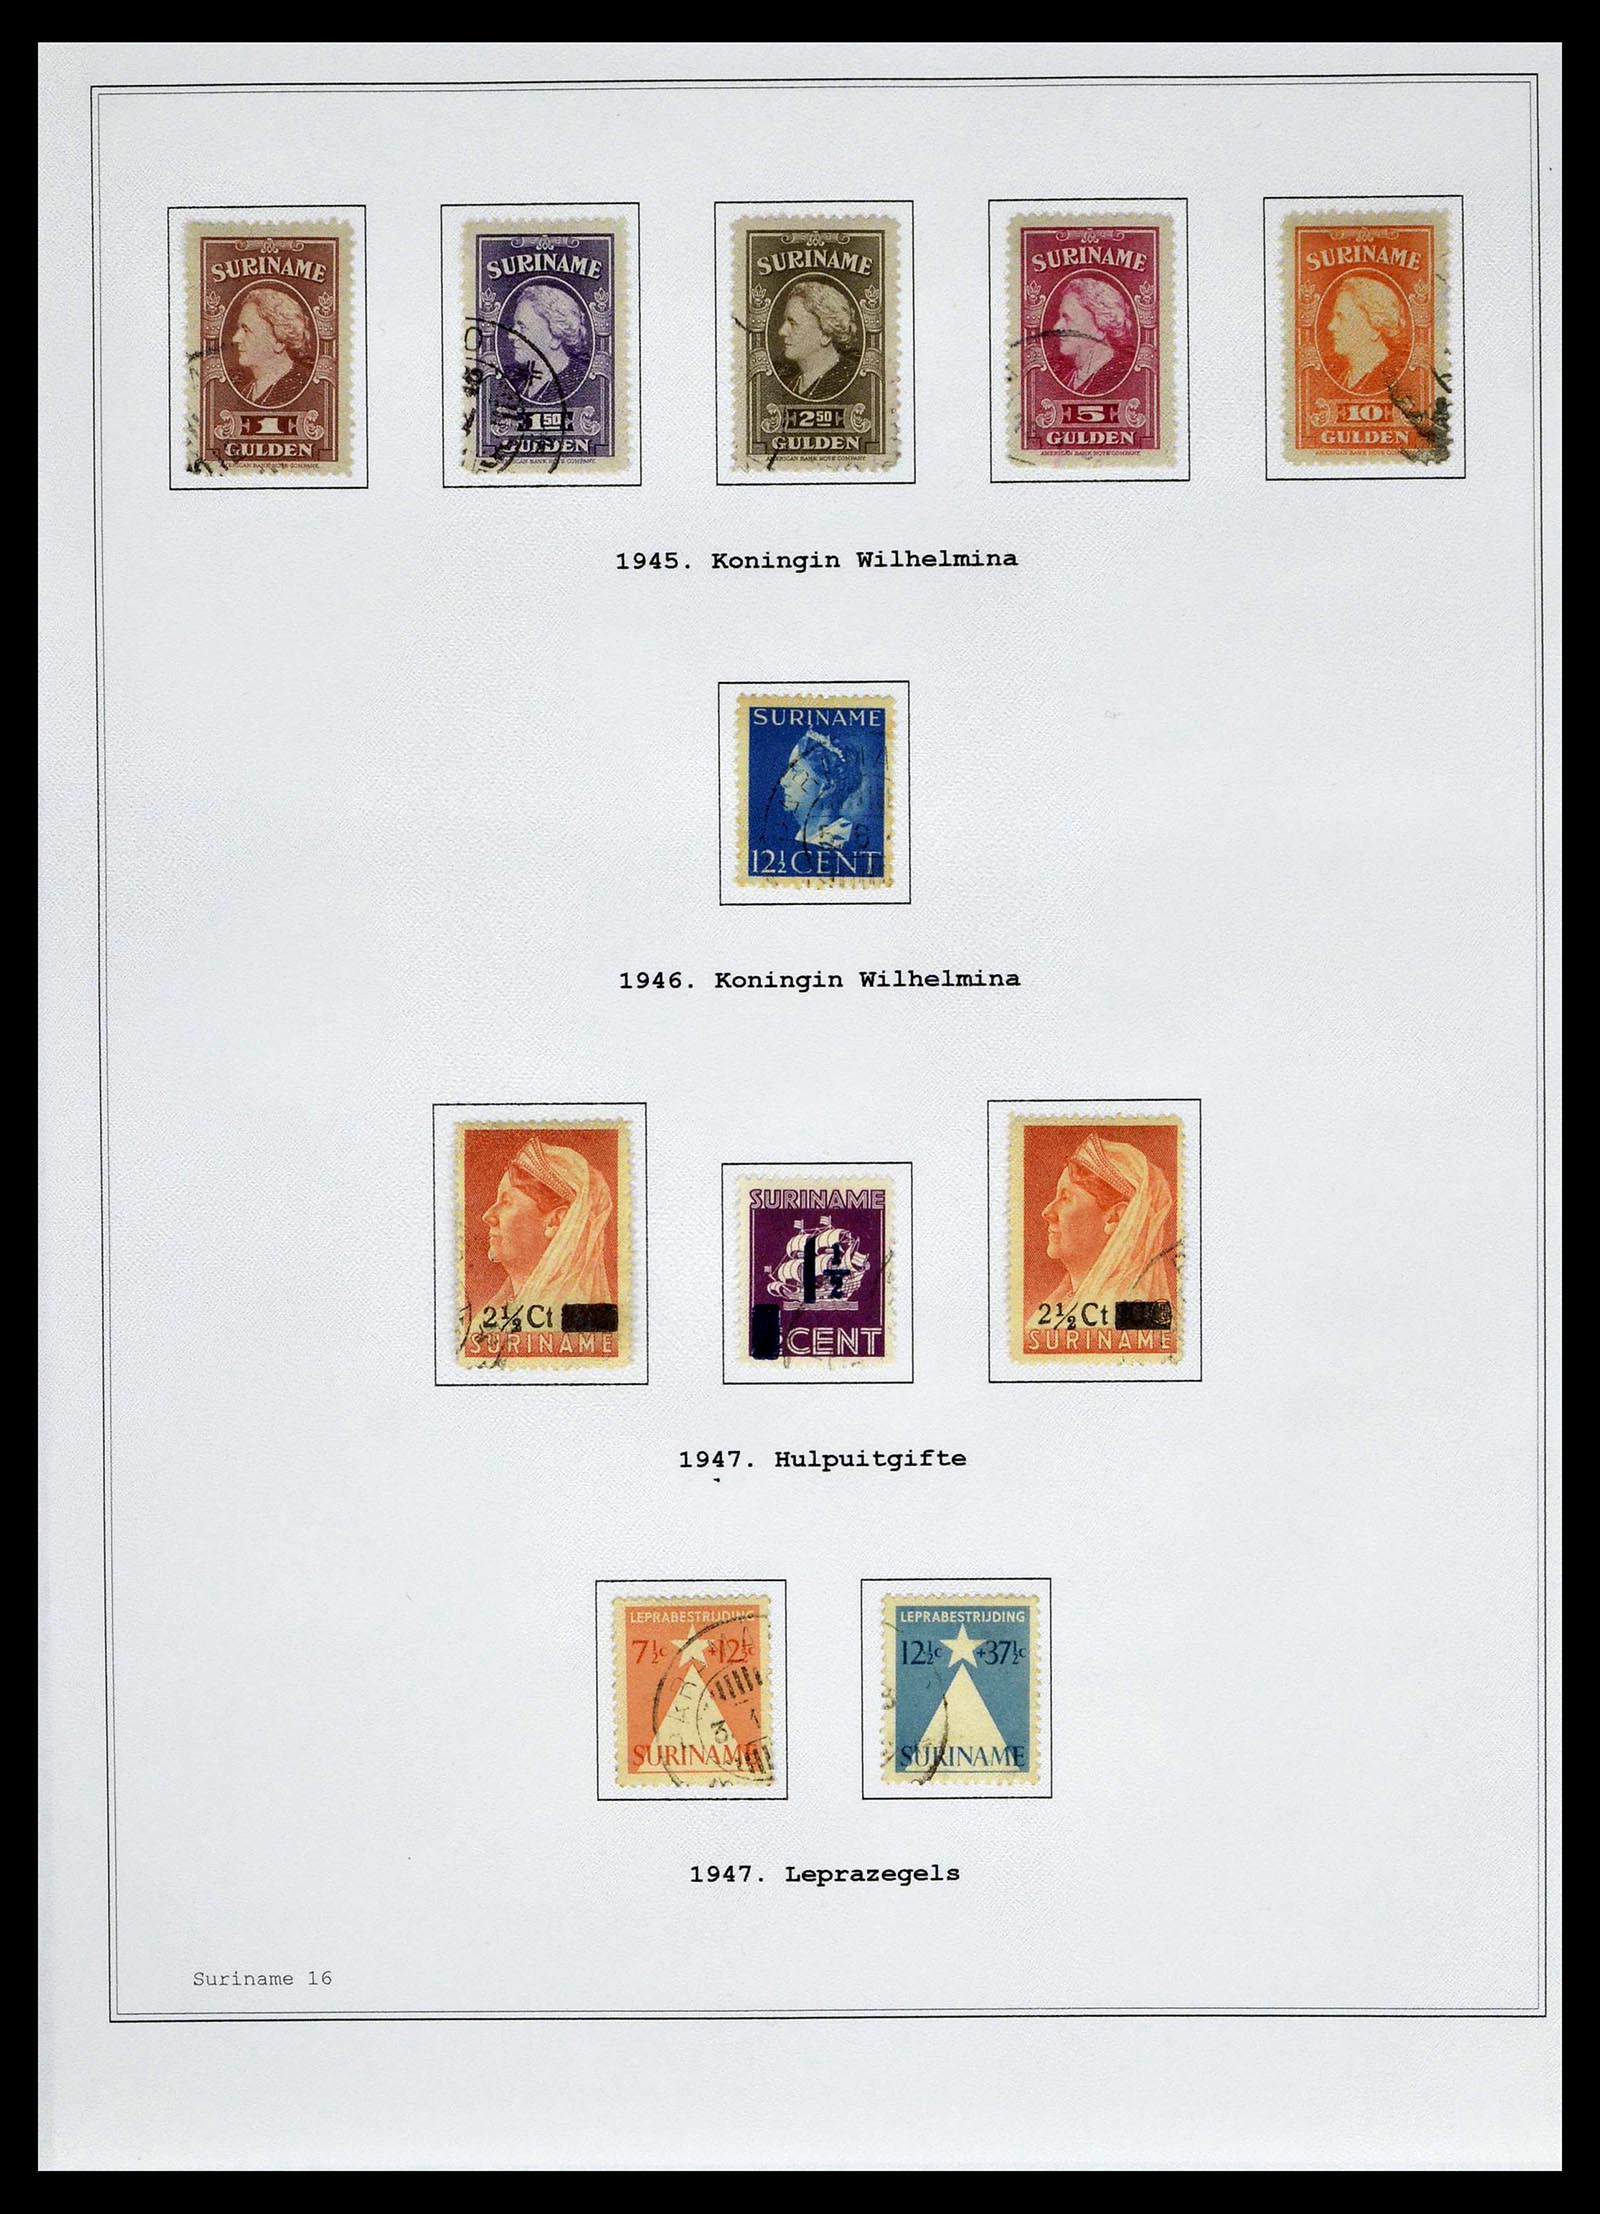 39026 0127 - Stamp collection 39026 Dutch east Indies and Suriname 1864-1975.